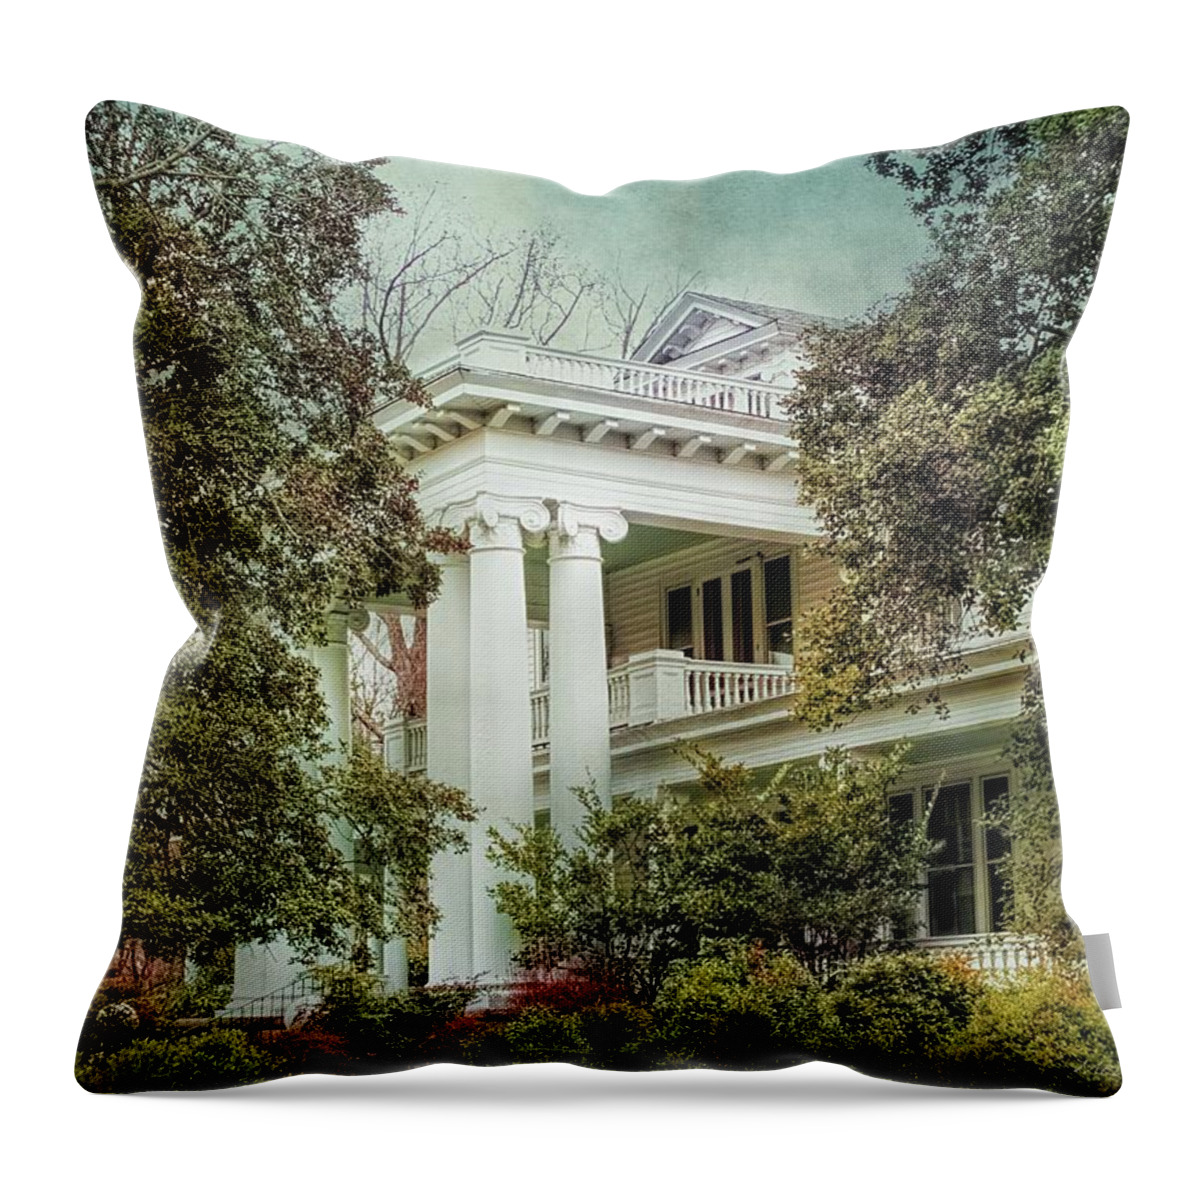 Architecture Throw Pillow featuring the photograph Elegant Historic Southern Home by Melissa Bittinger